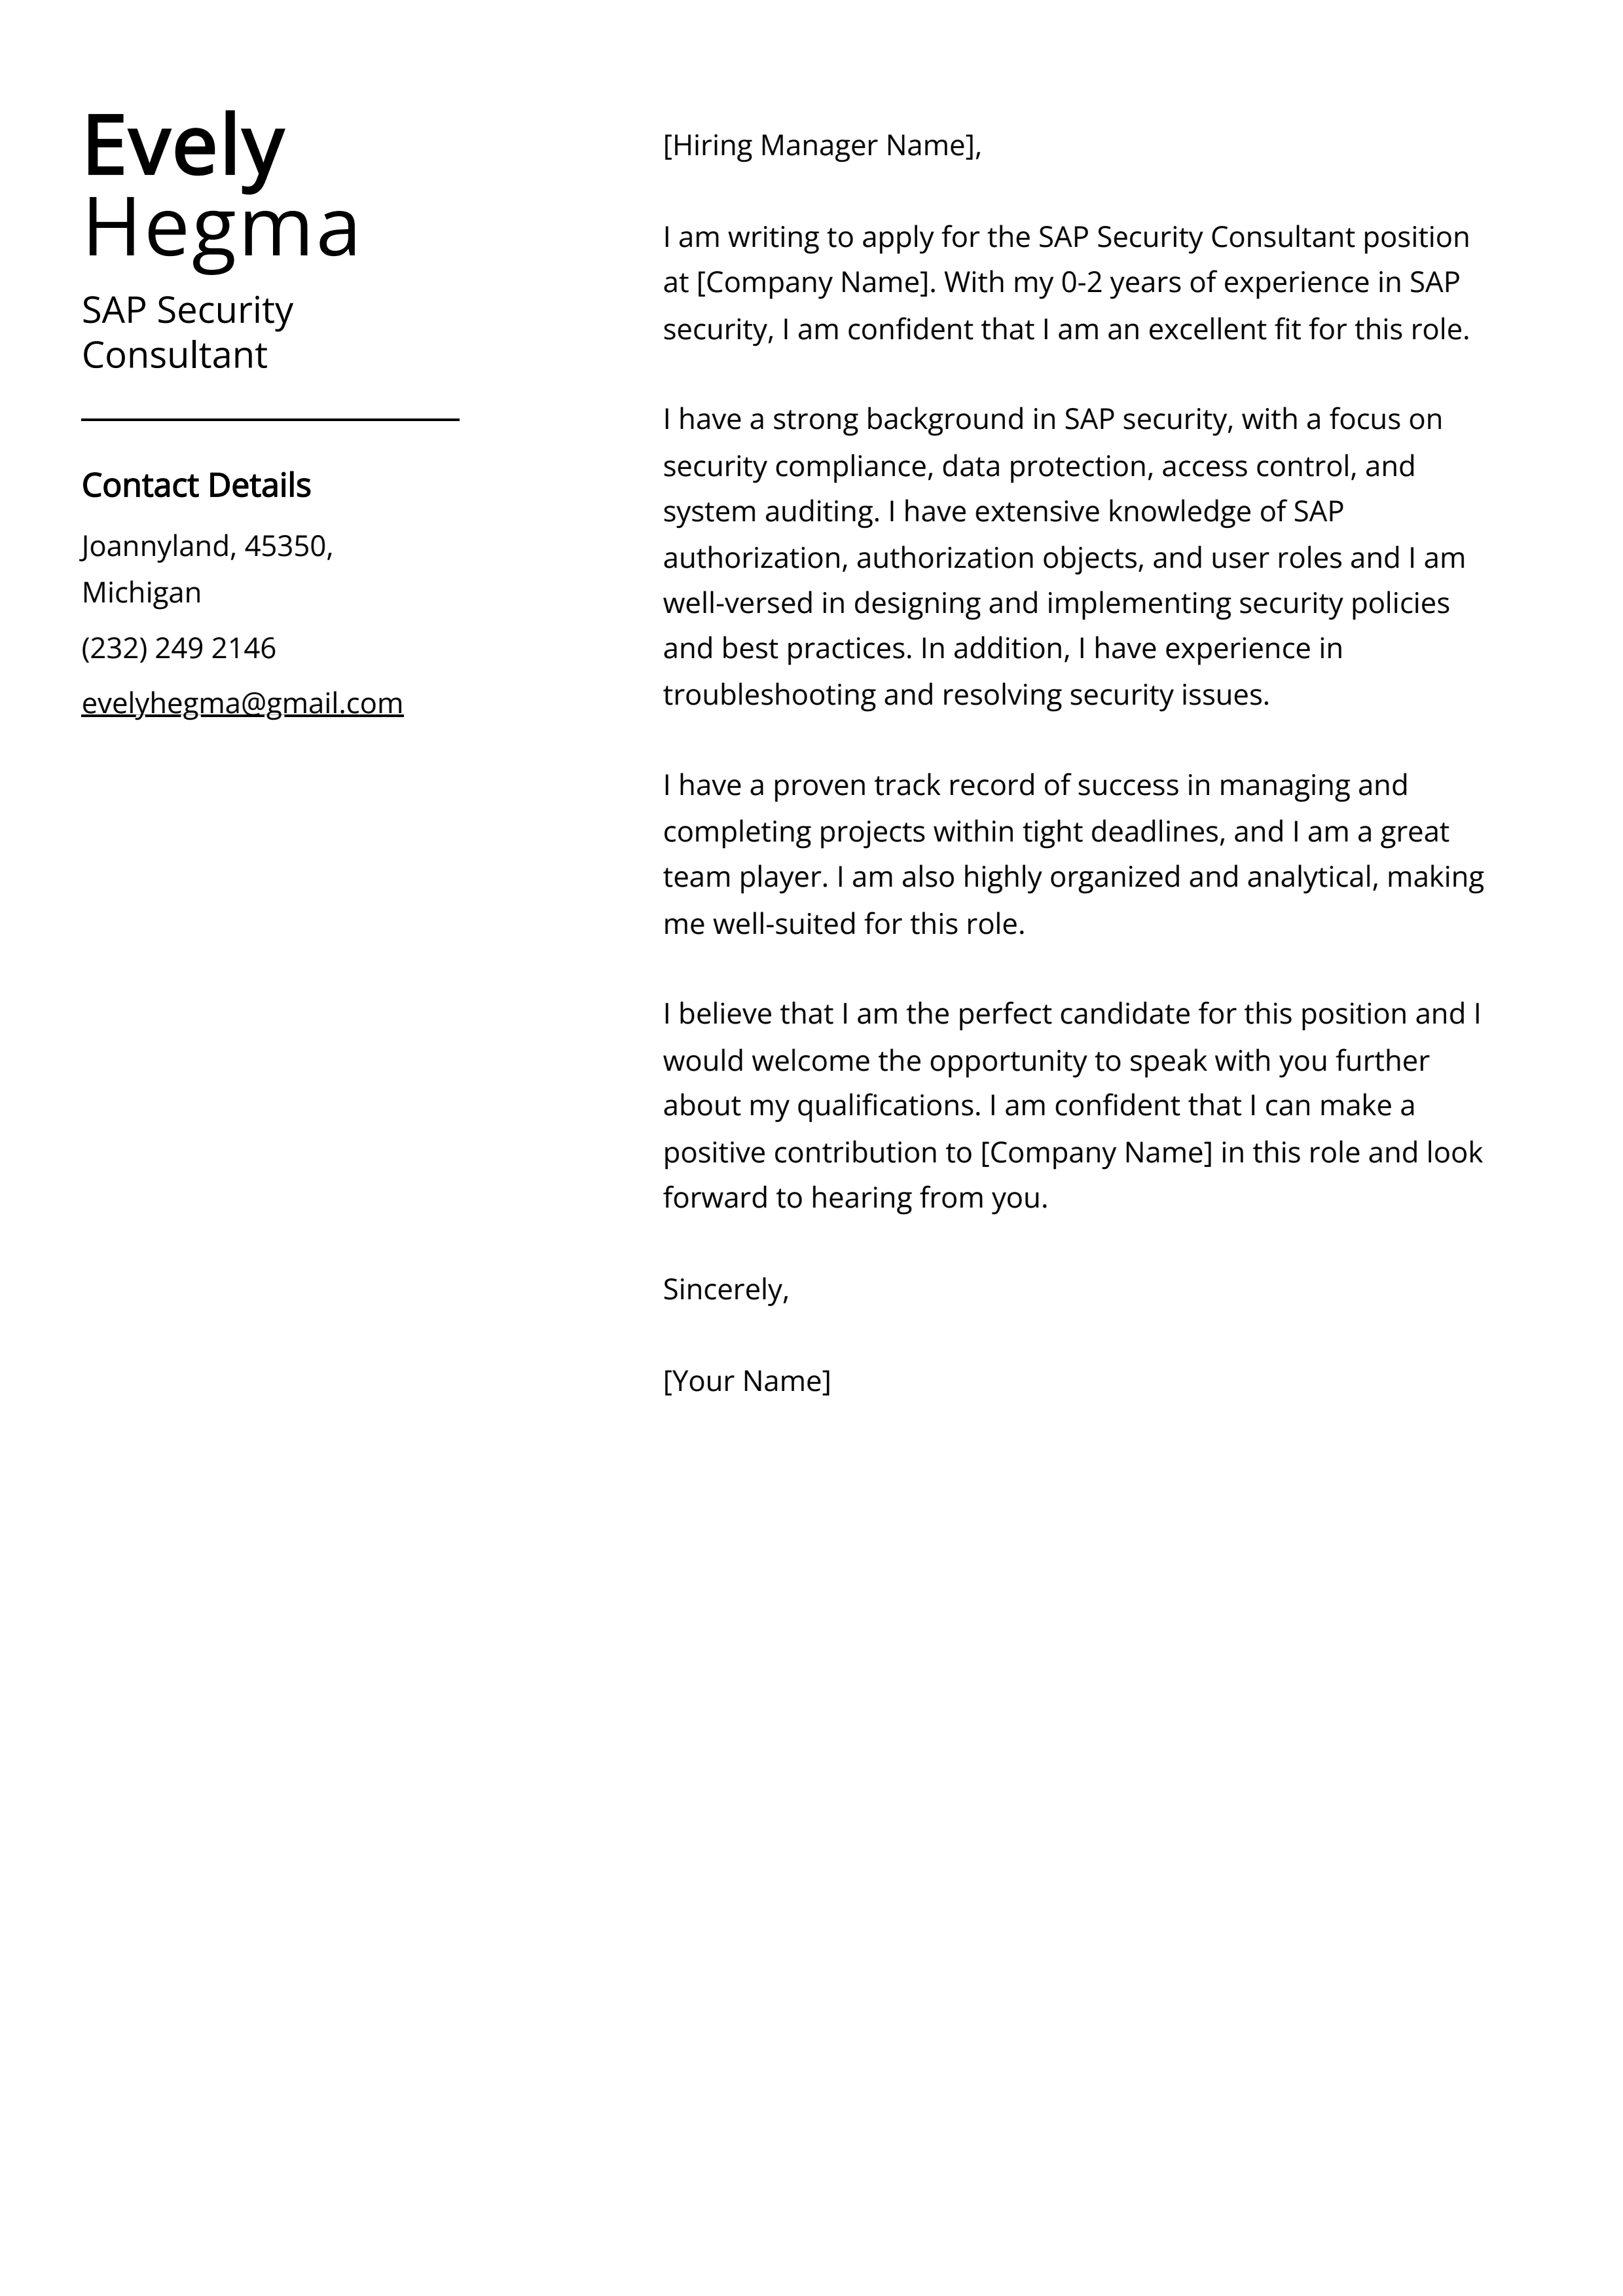 SAP Security Consultant Cover Letter Example